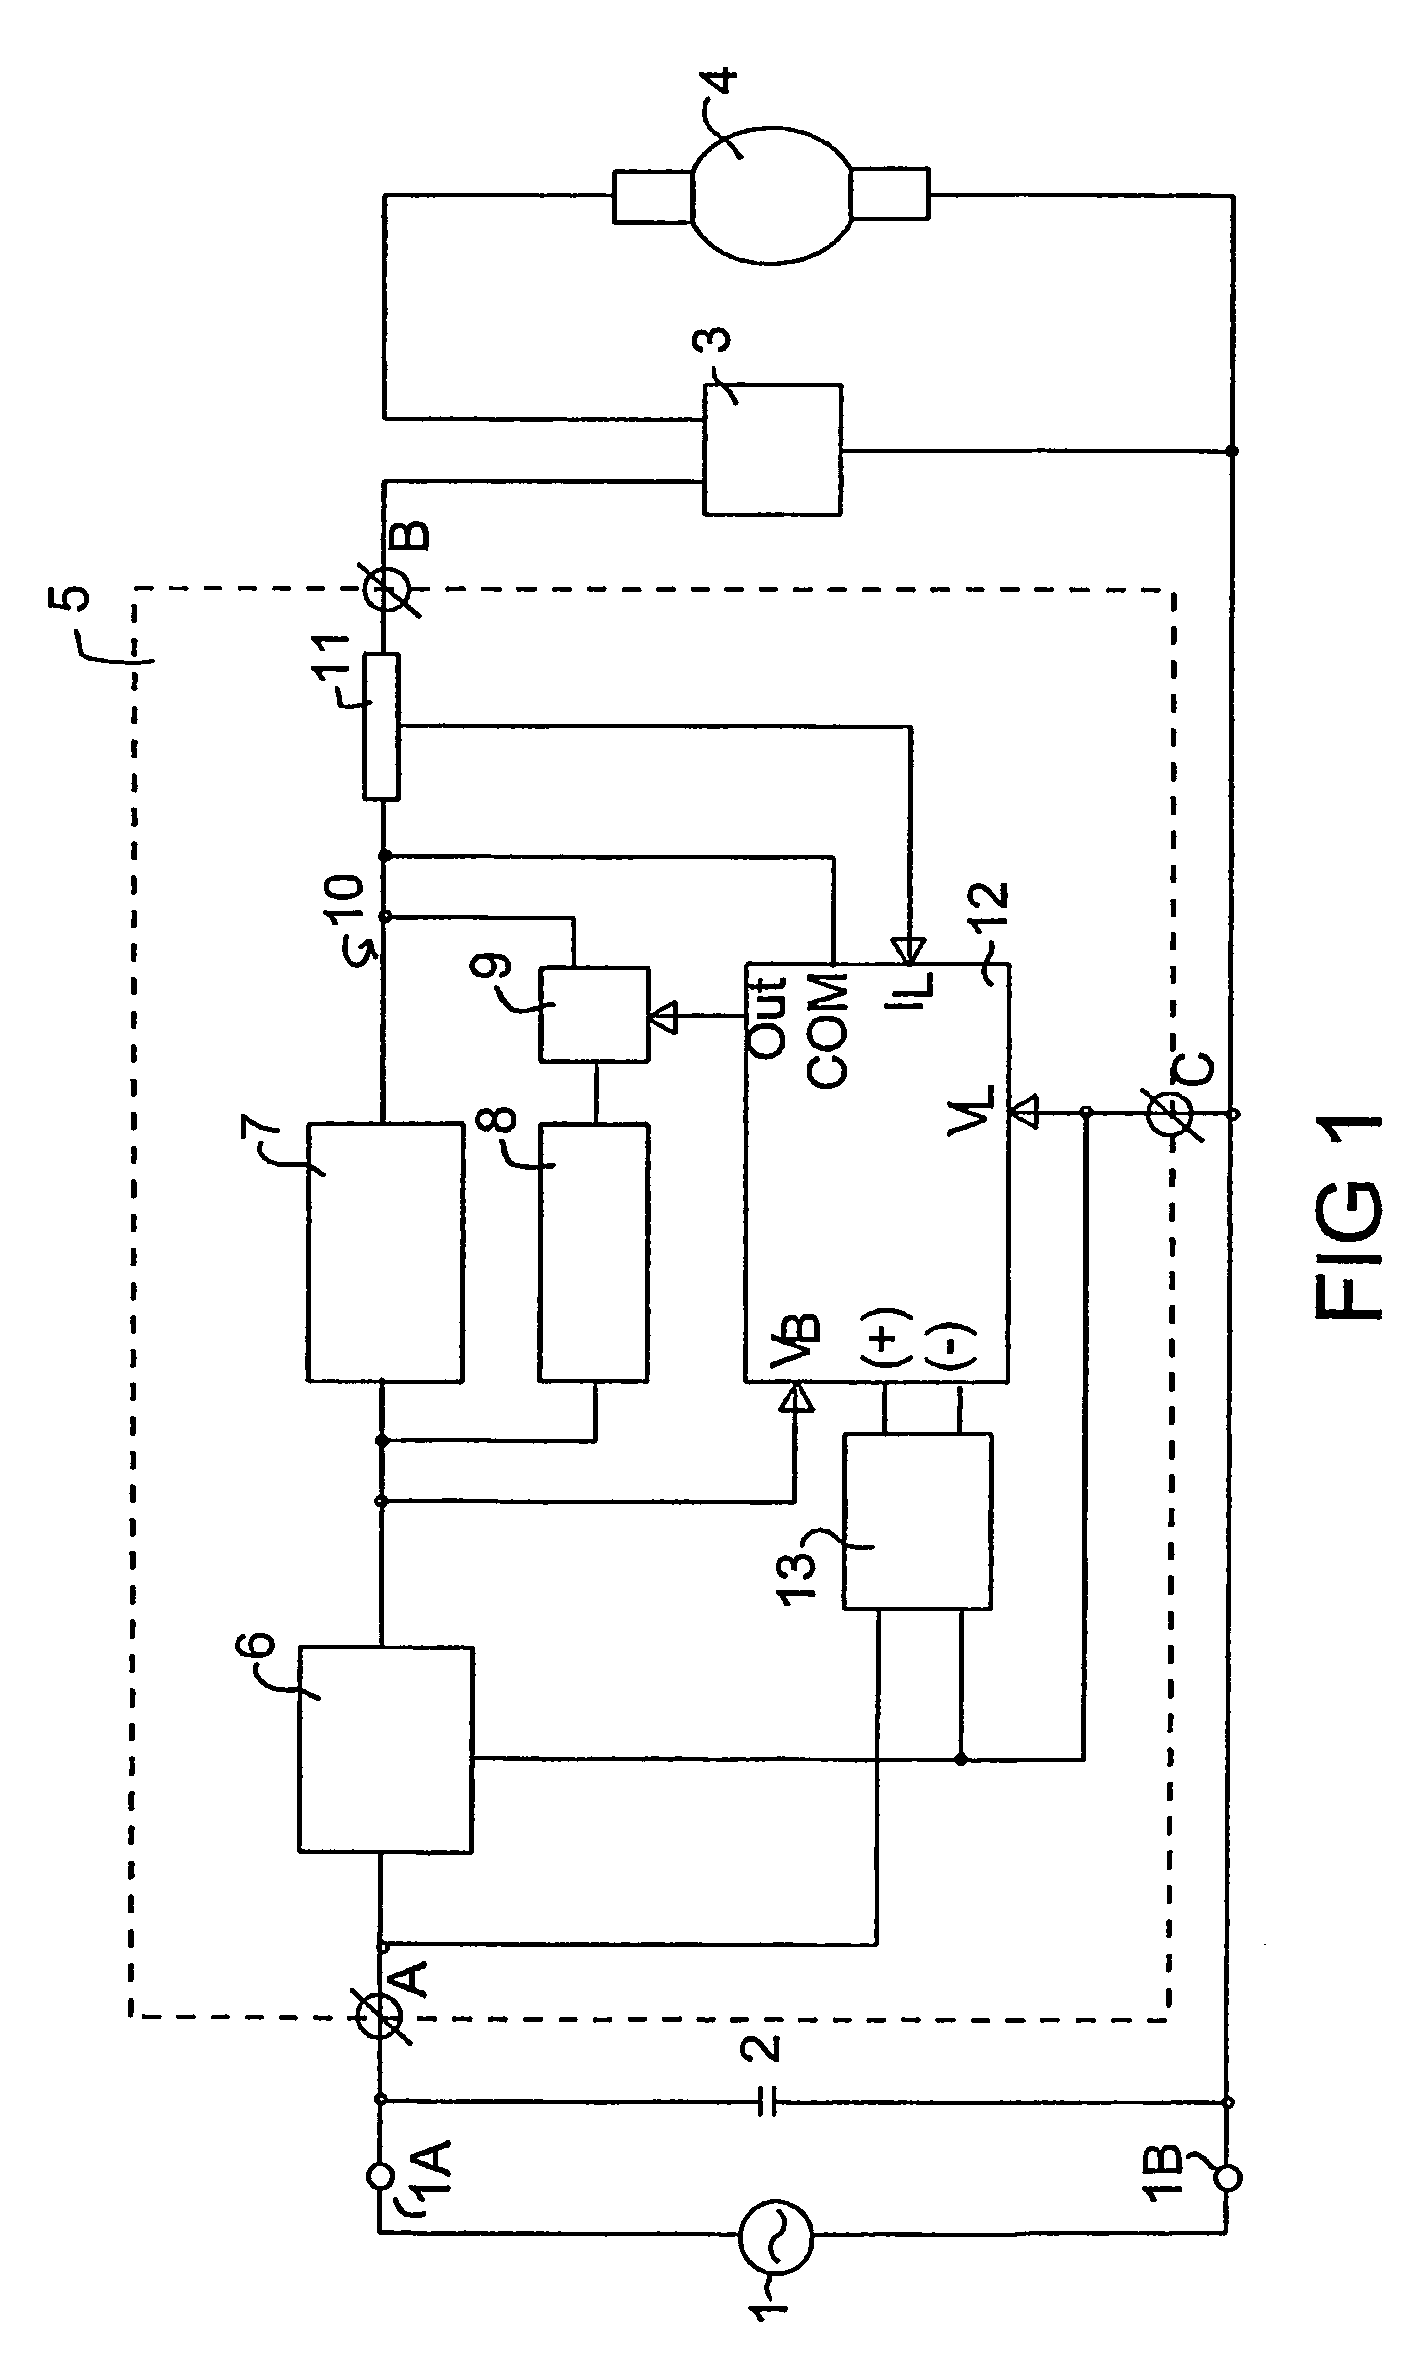 High intensity discharge lamp control